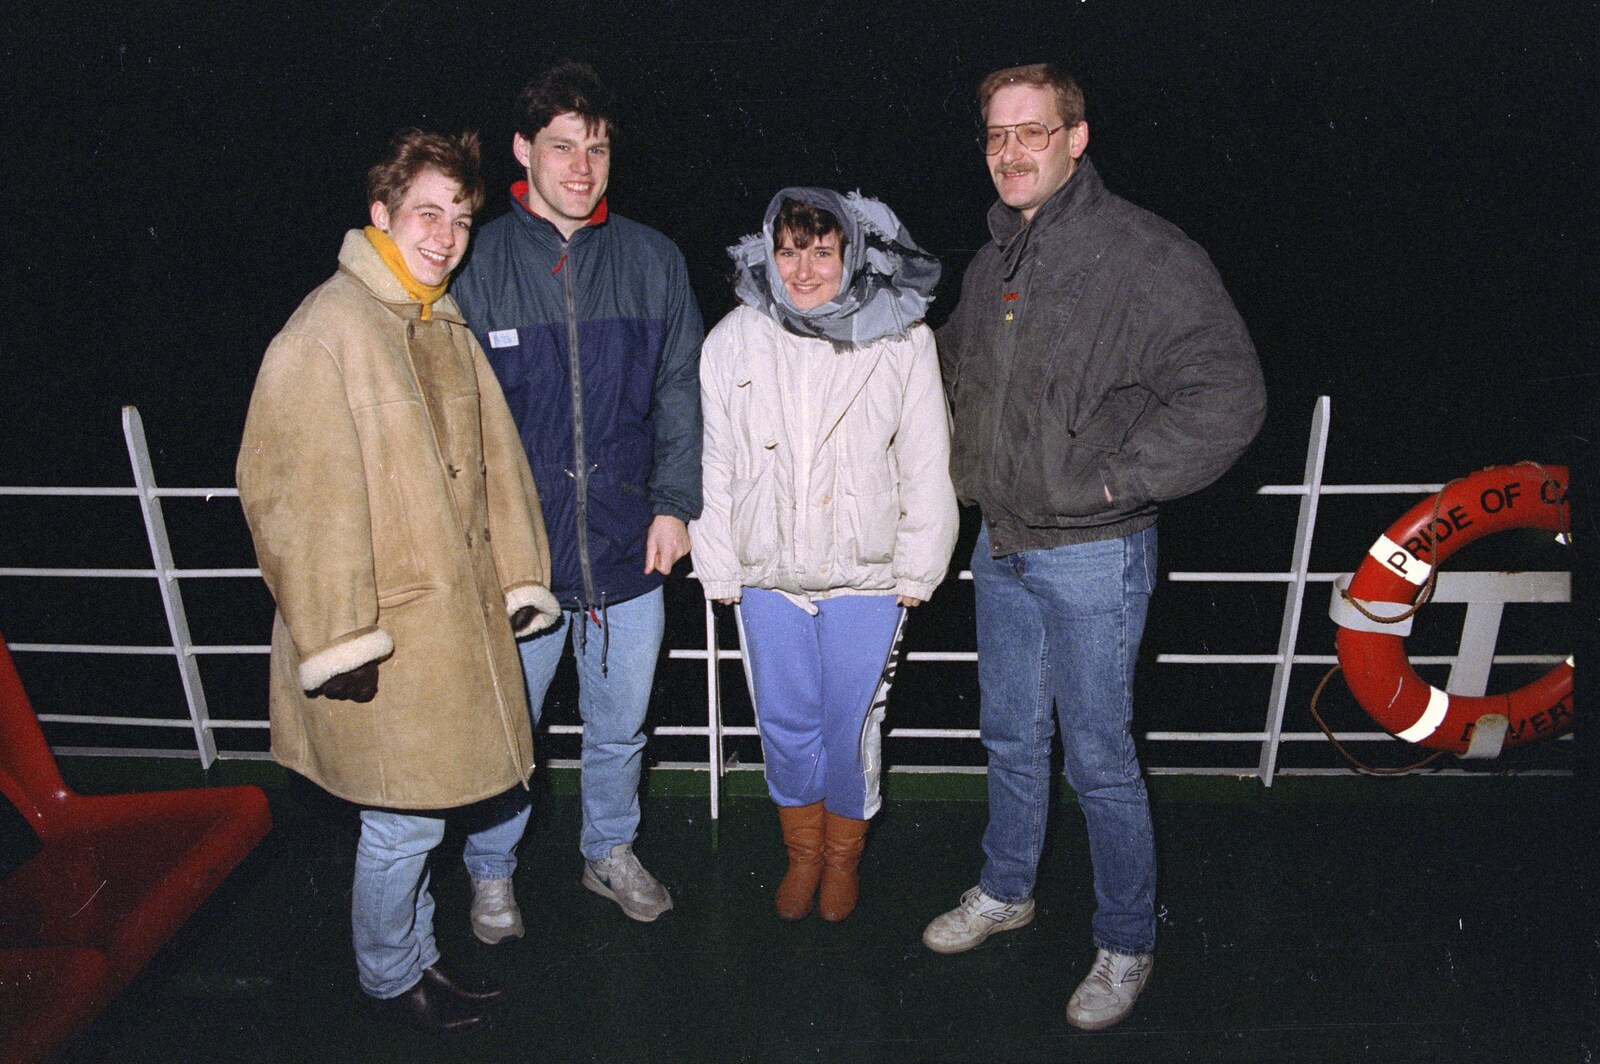 The windy deck of the Pride of Calais ferry from Clays Does Bruges, Belgium - 19th December 1992